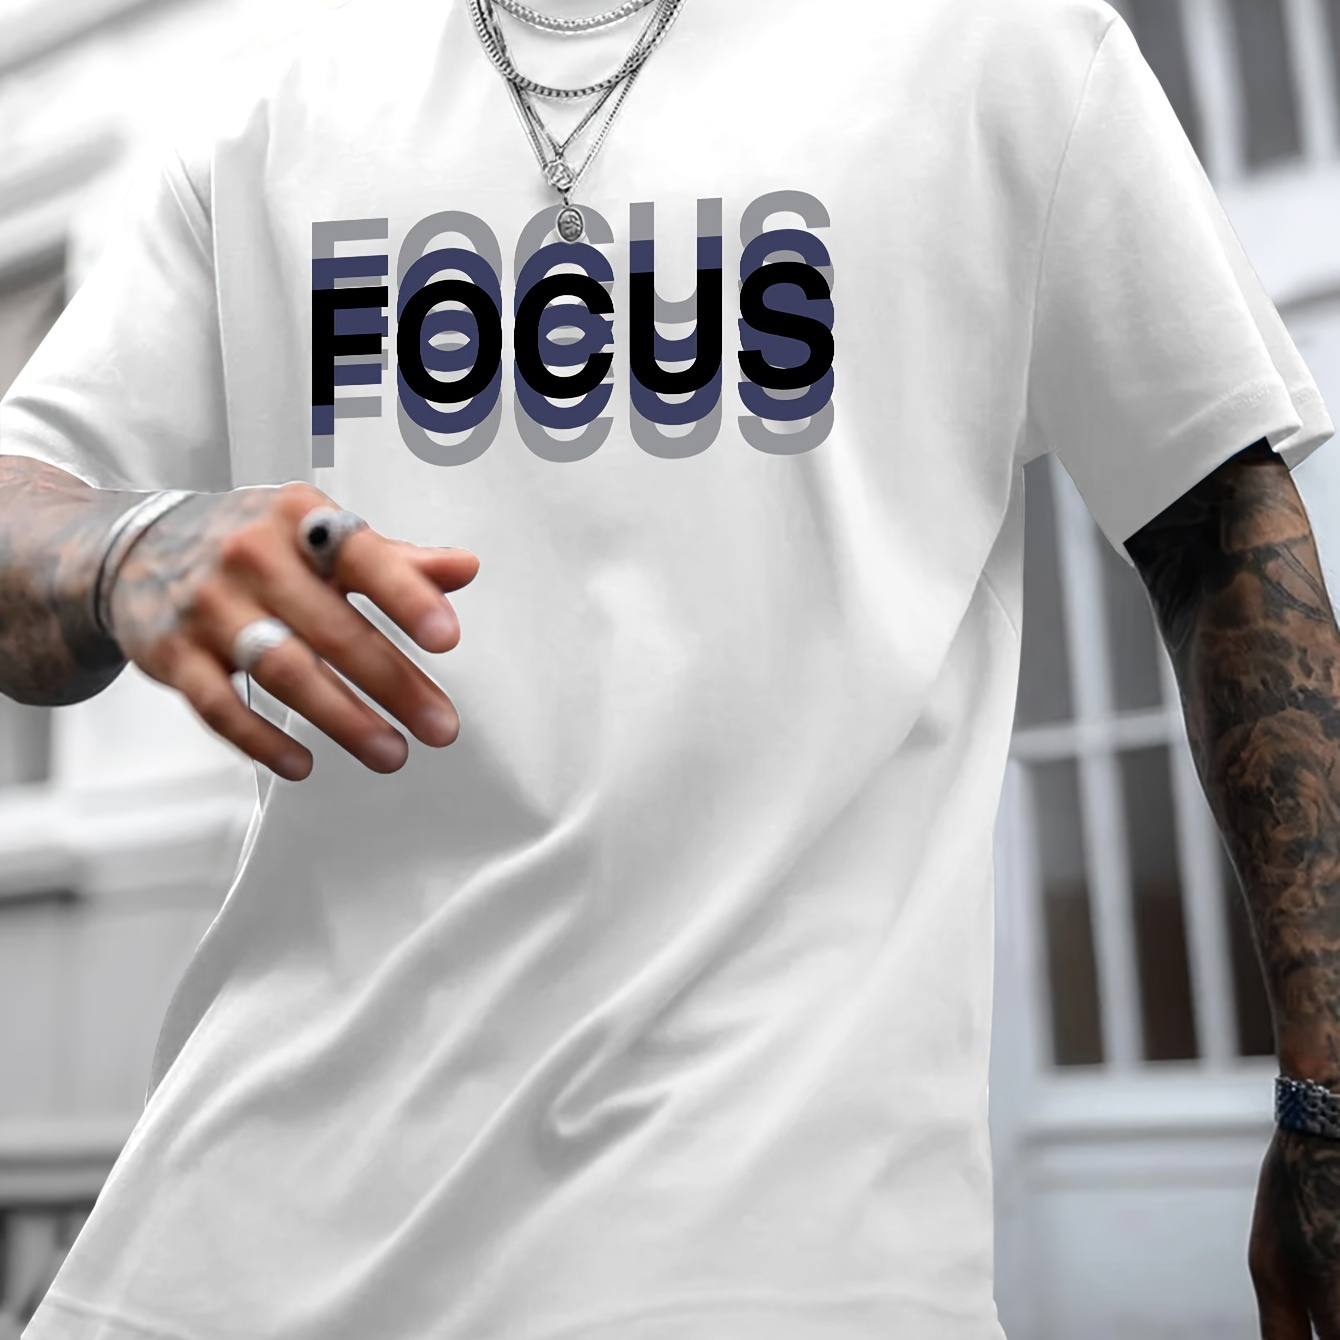 

Focus Print Men's Summer Casual Short Sleeve T-shirt, Round Neck, Comfy And Simple Fit, Versatile Outdoor Top For Daily Wear